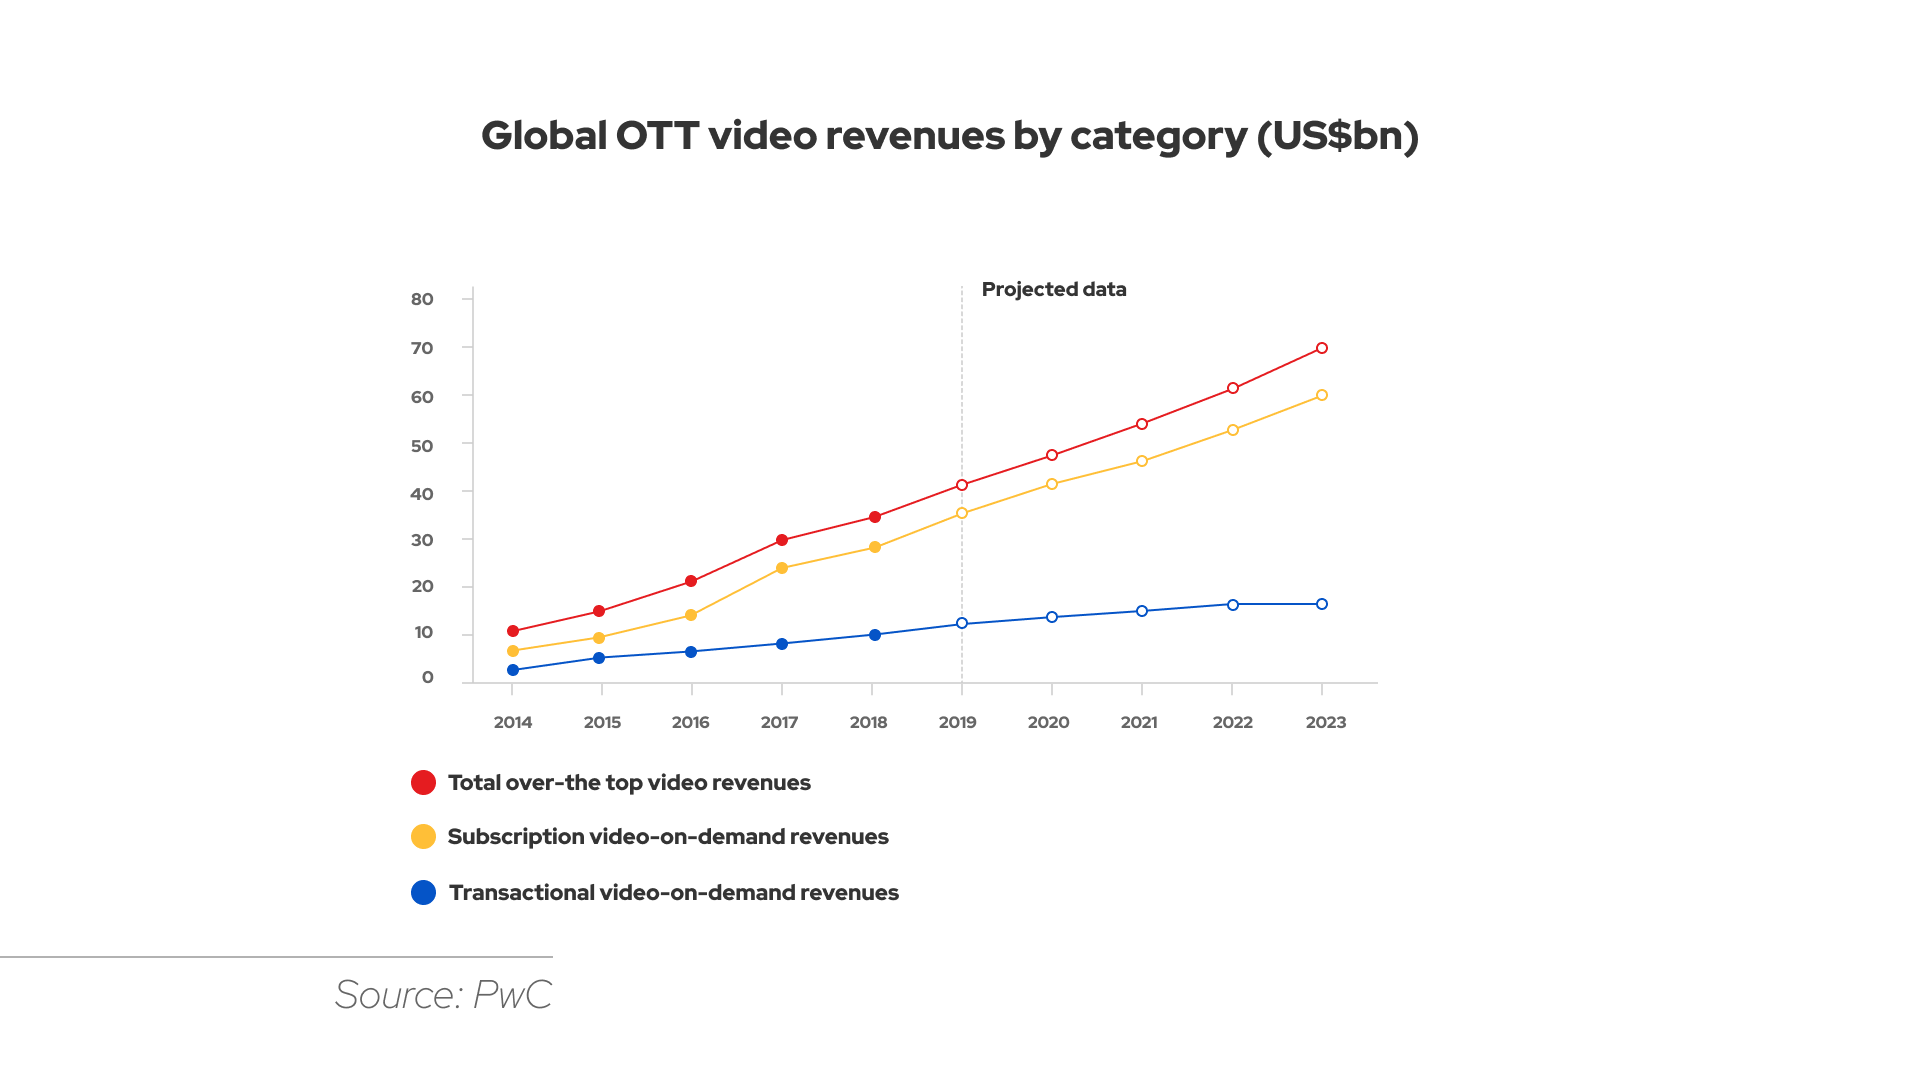 PwC projects that total OTT video content revenues will achieve more than $70 billion mark.